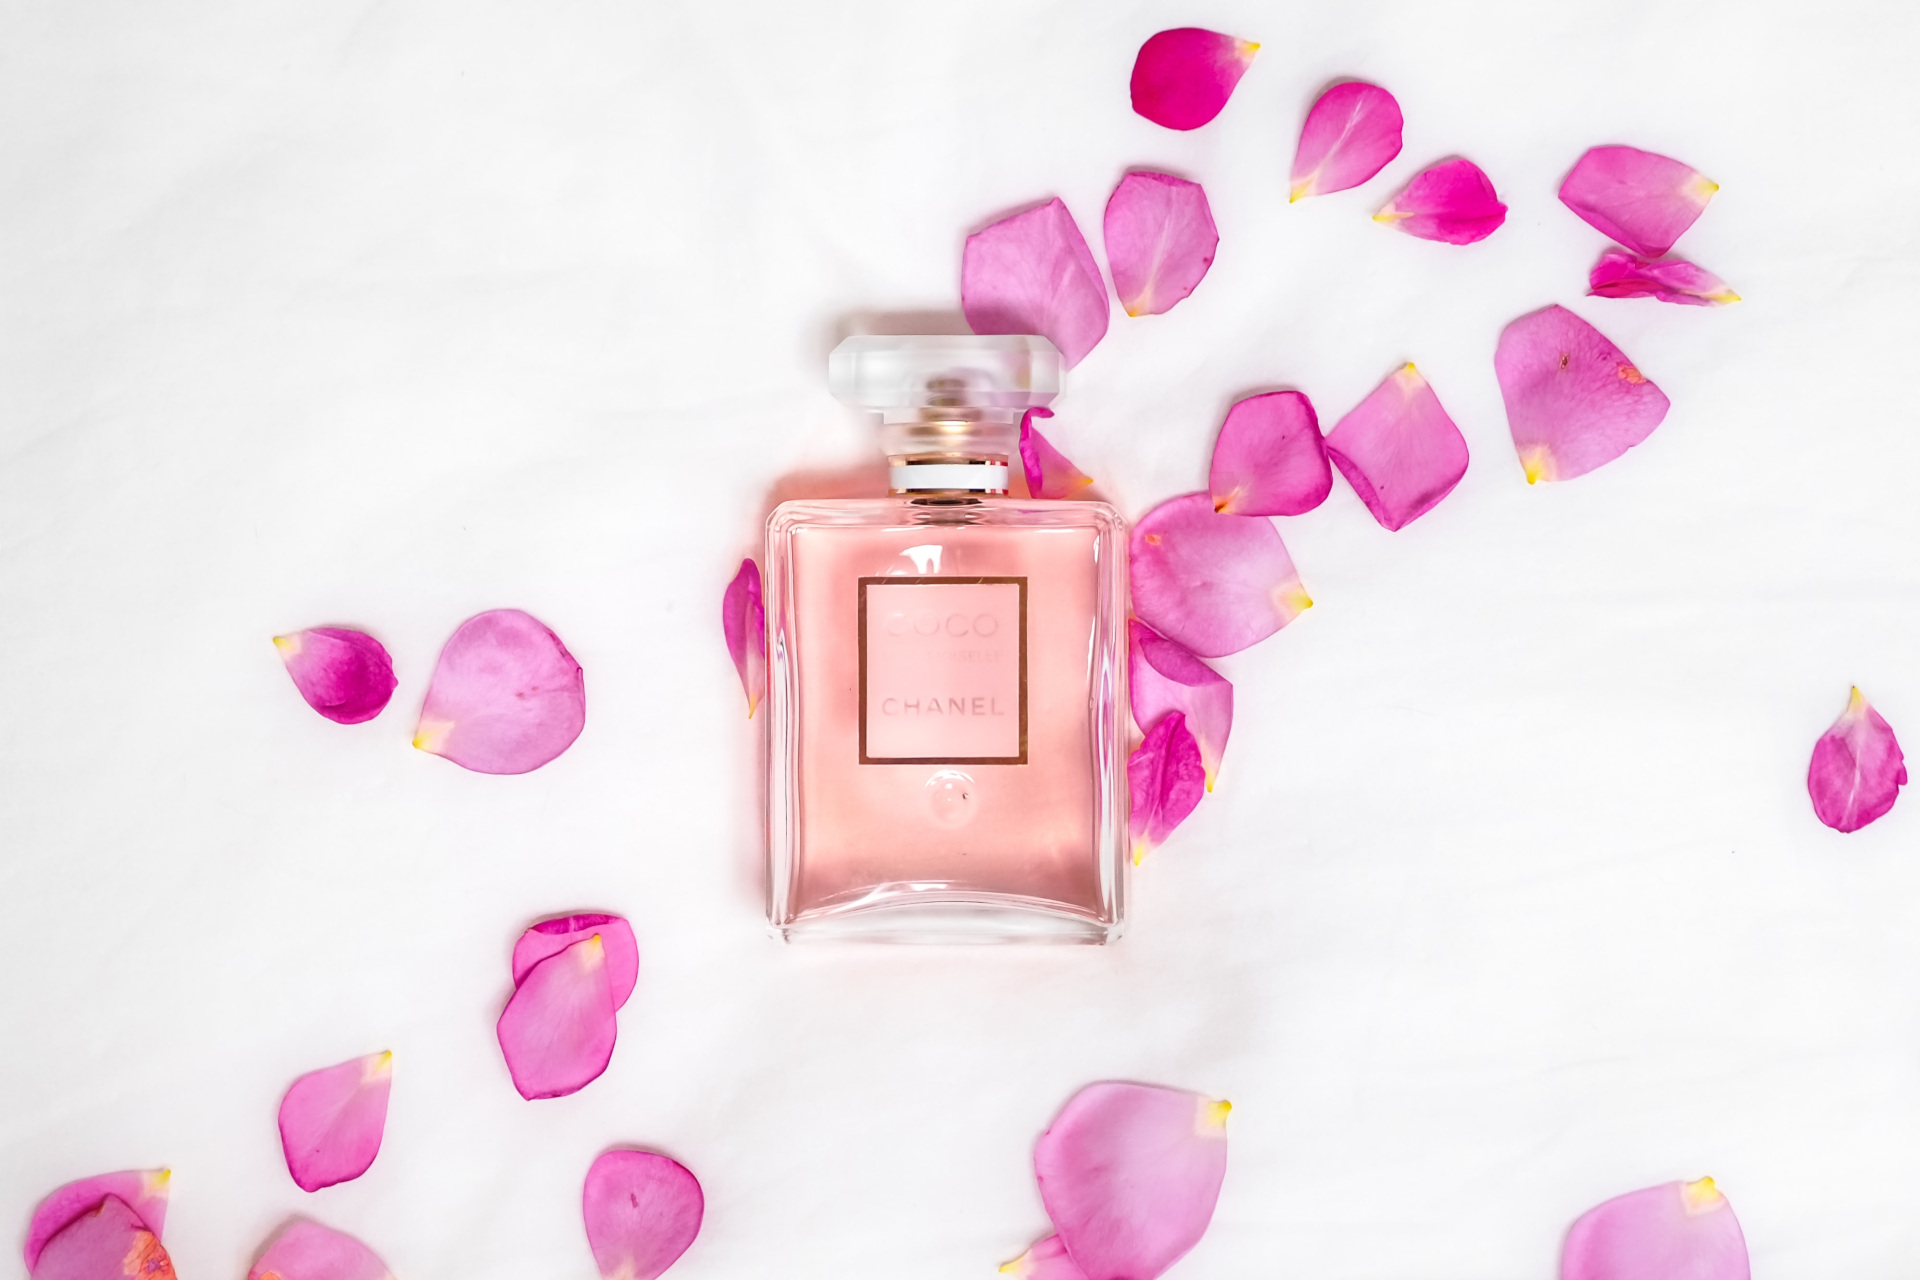 Pink perfume bottle on white surface with pink flower petals